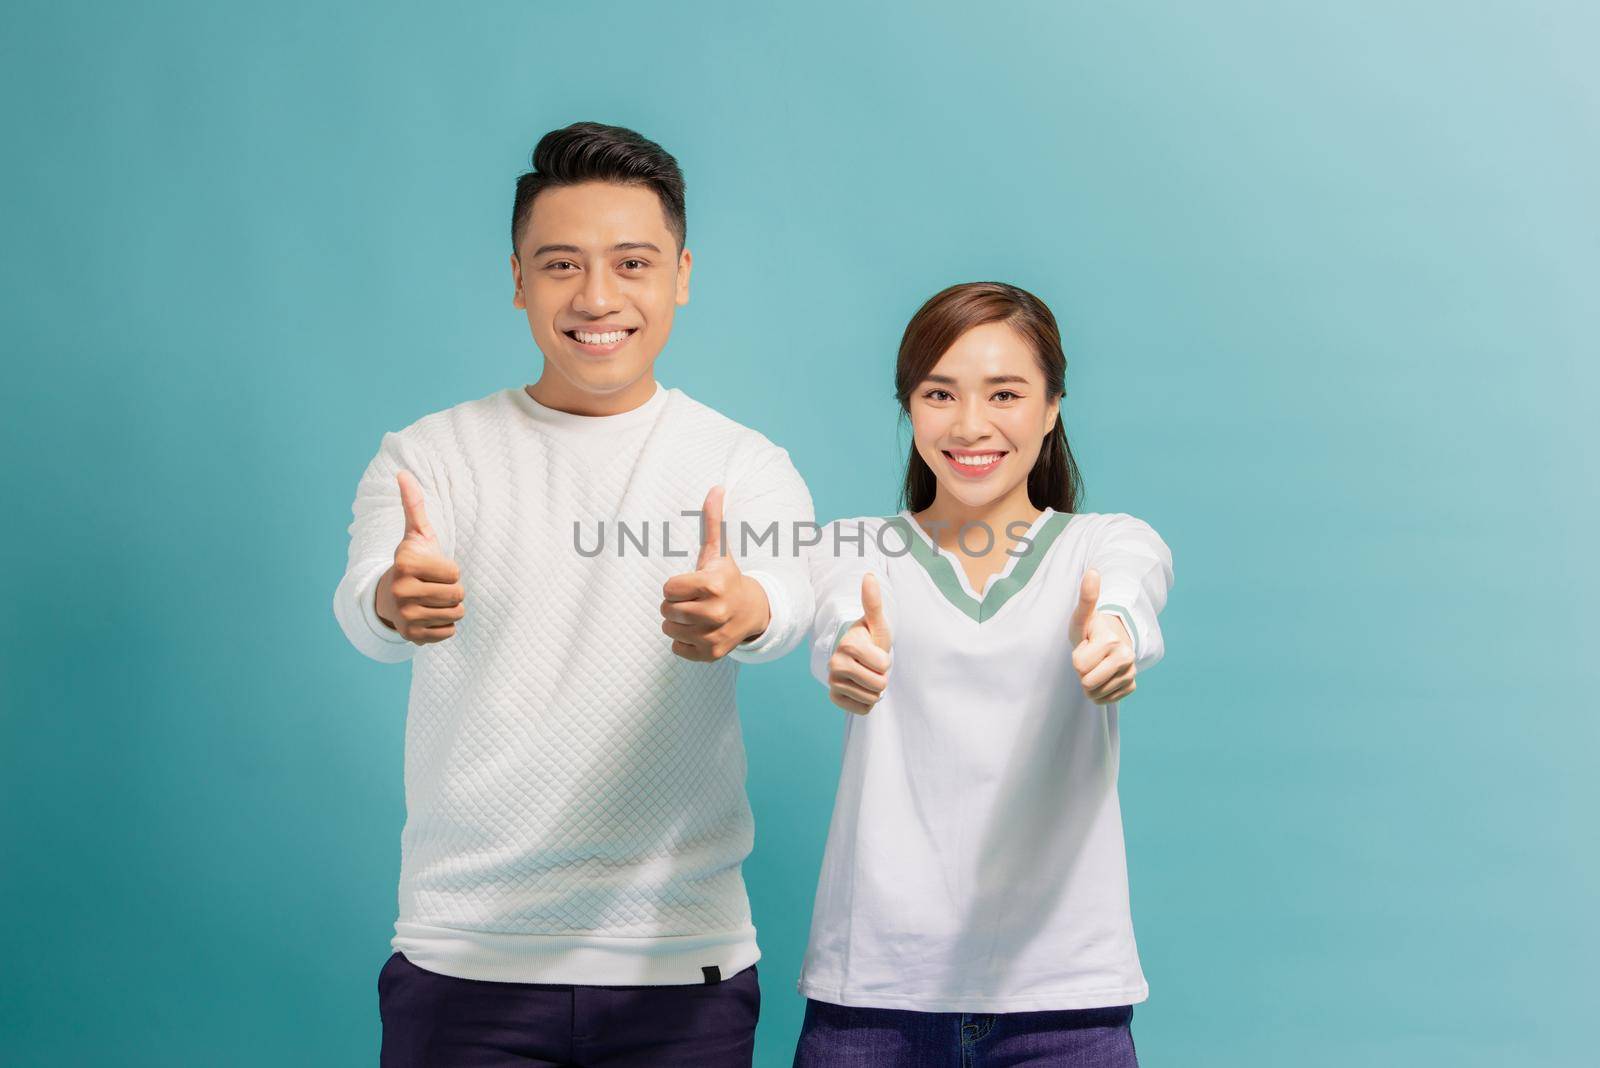 Attractive cheerful young lovers showing thumbs up